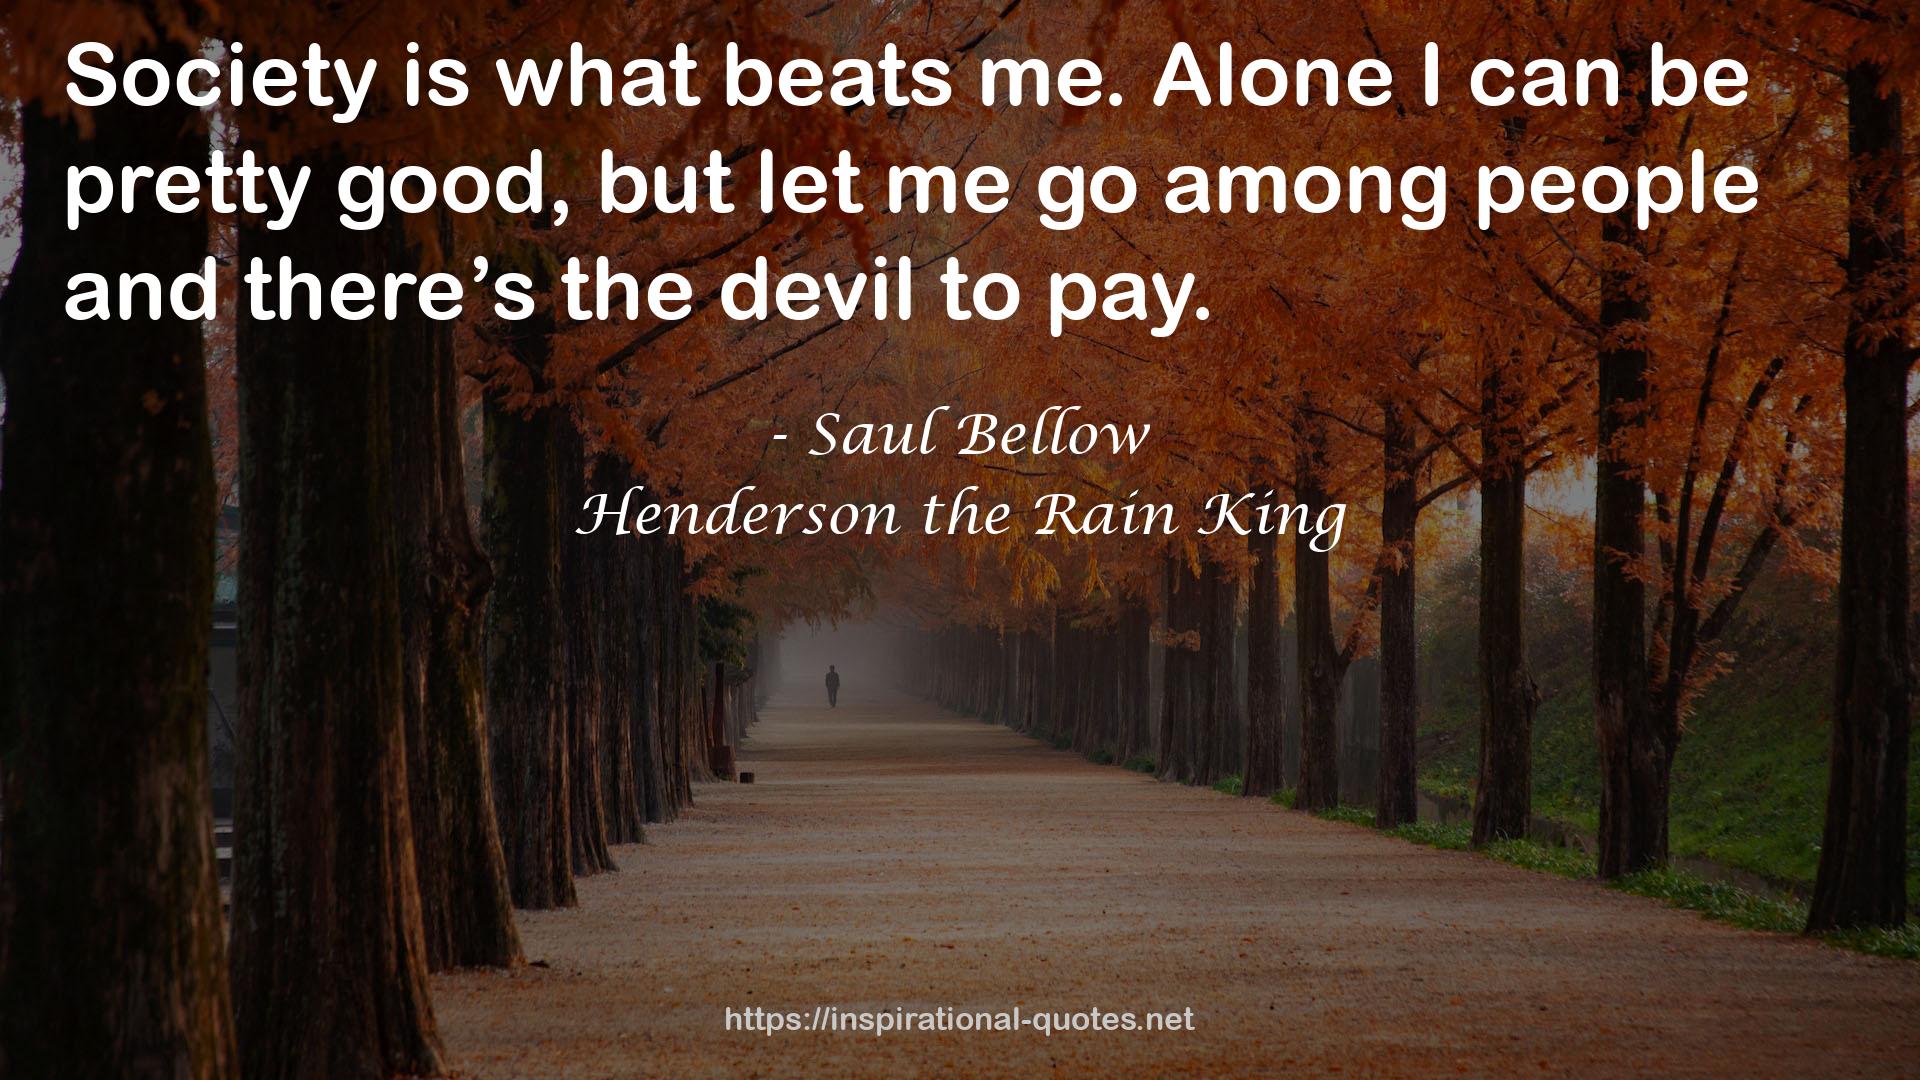 Henderson the Rain King QUOTES